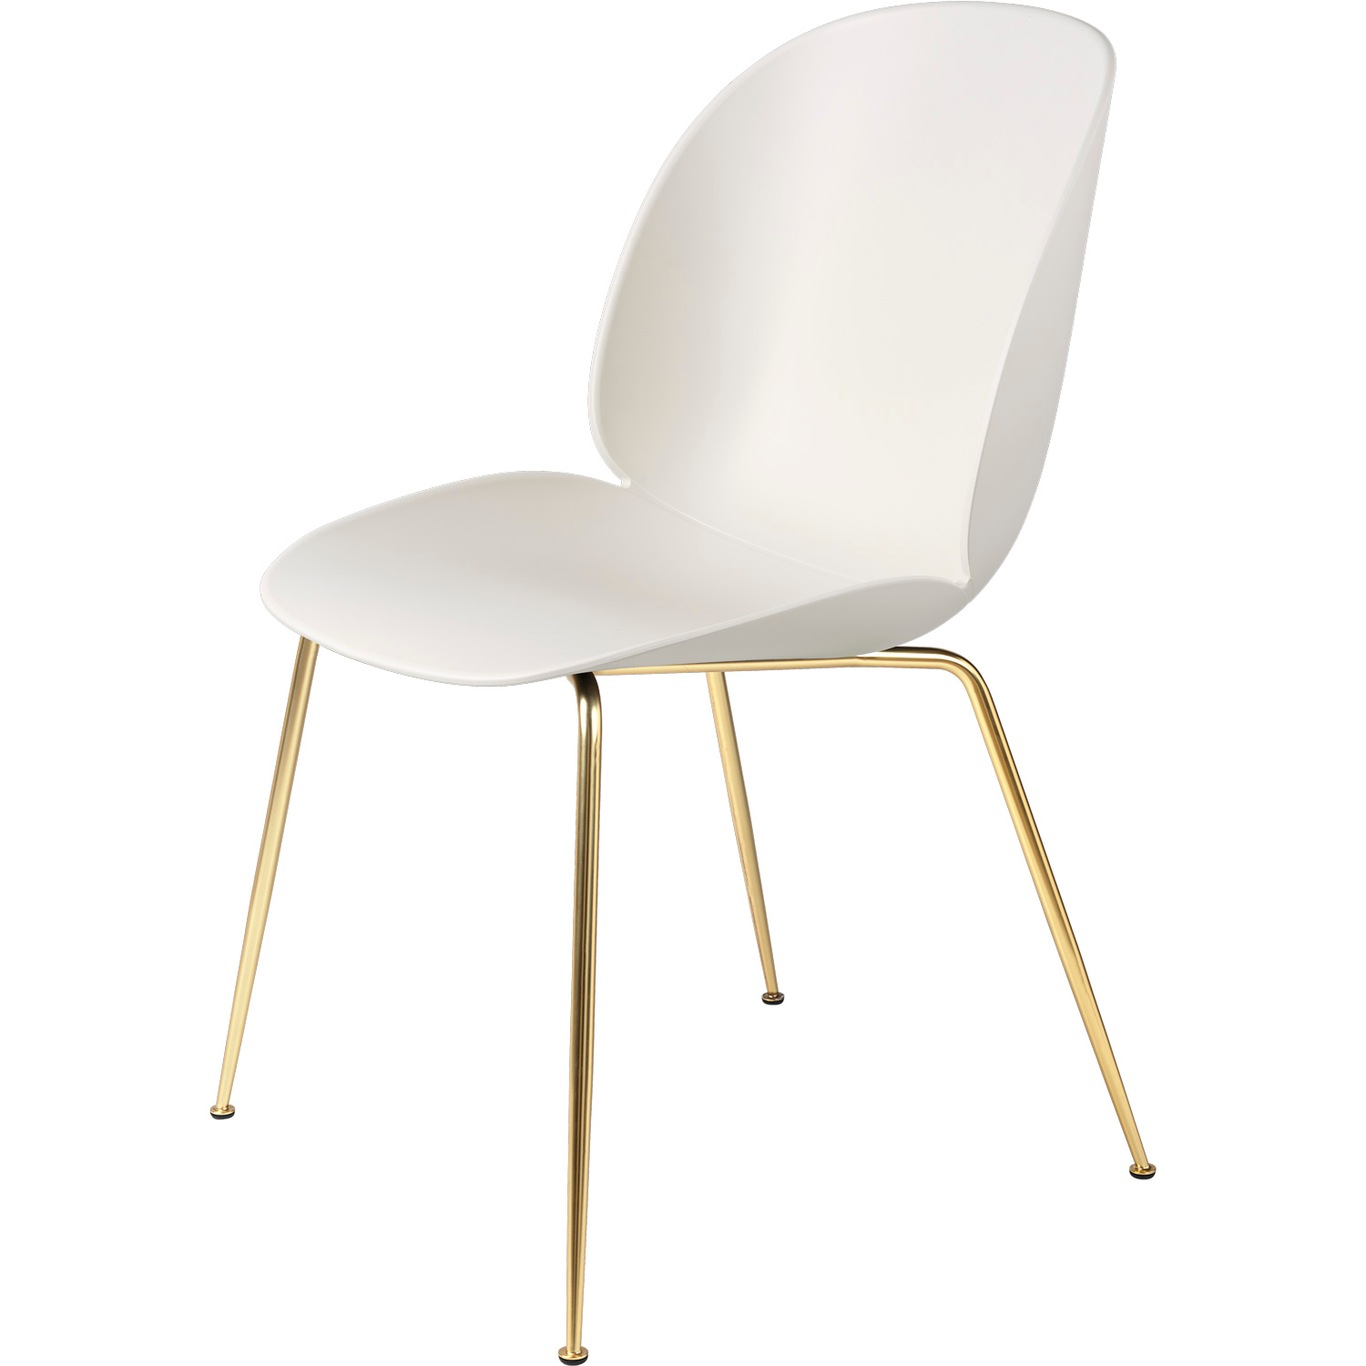 Beetle Dining Chair Un-upholstered, Conic Base Brass, Alabaster White